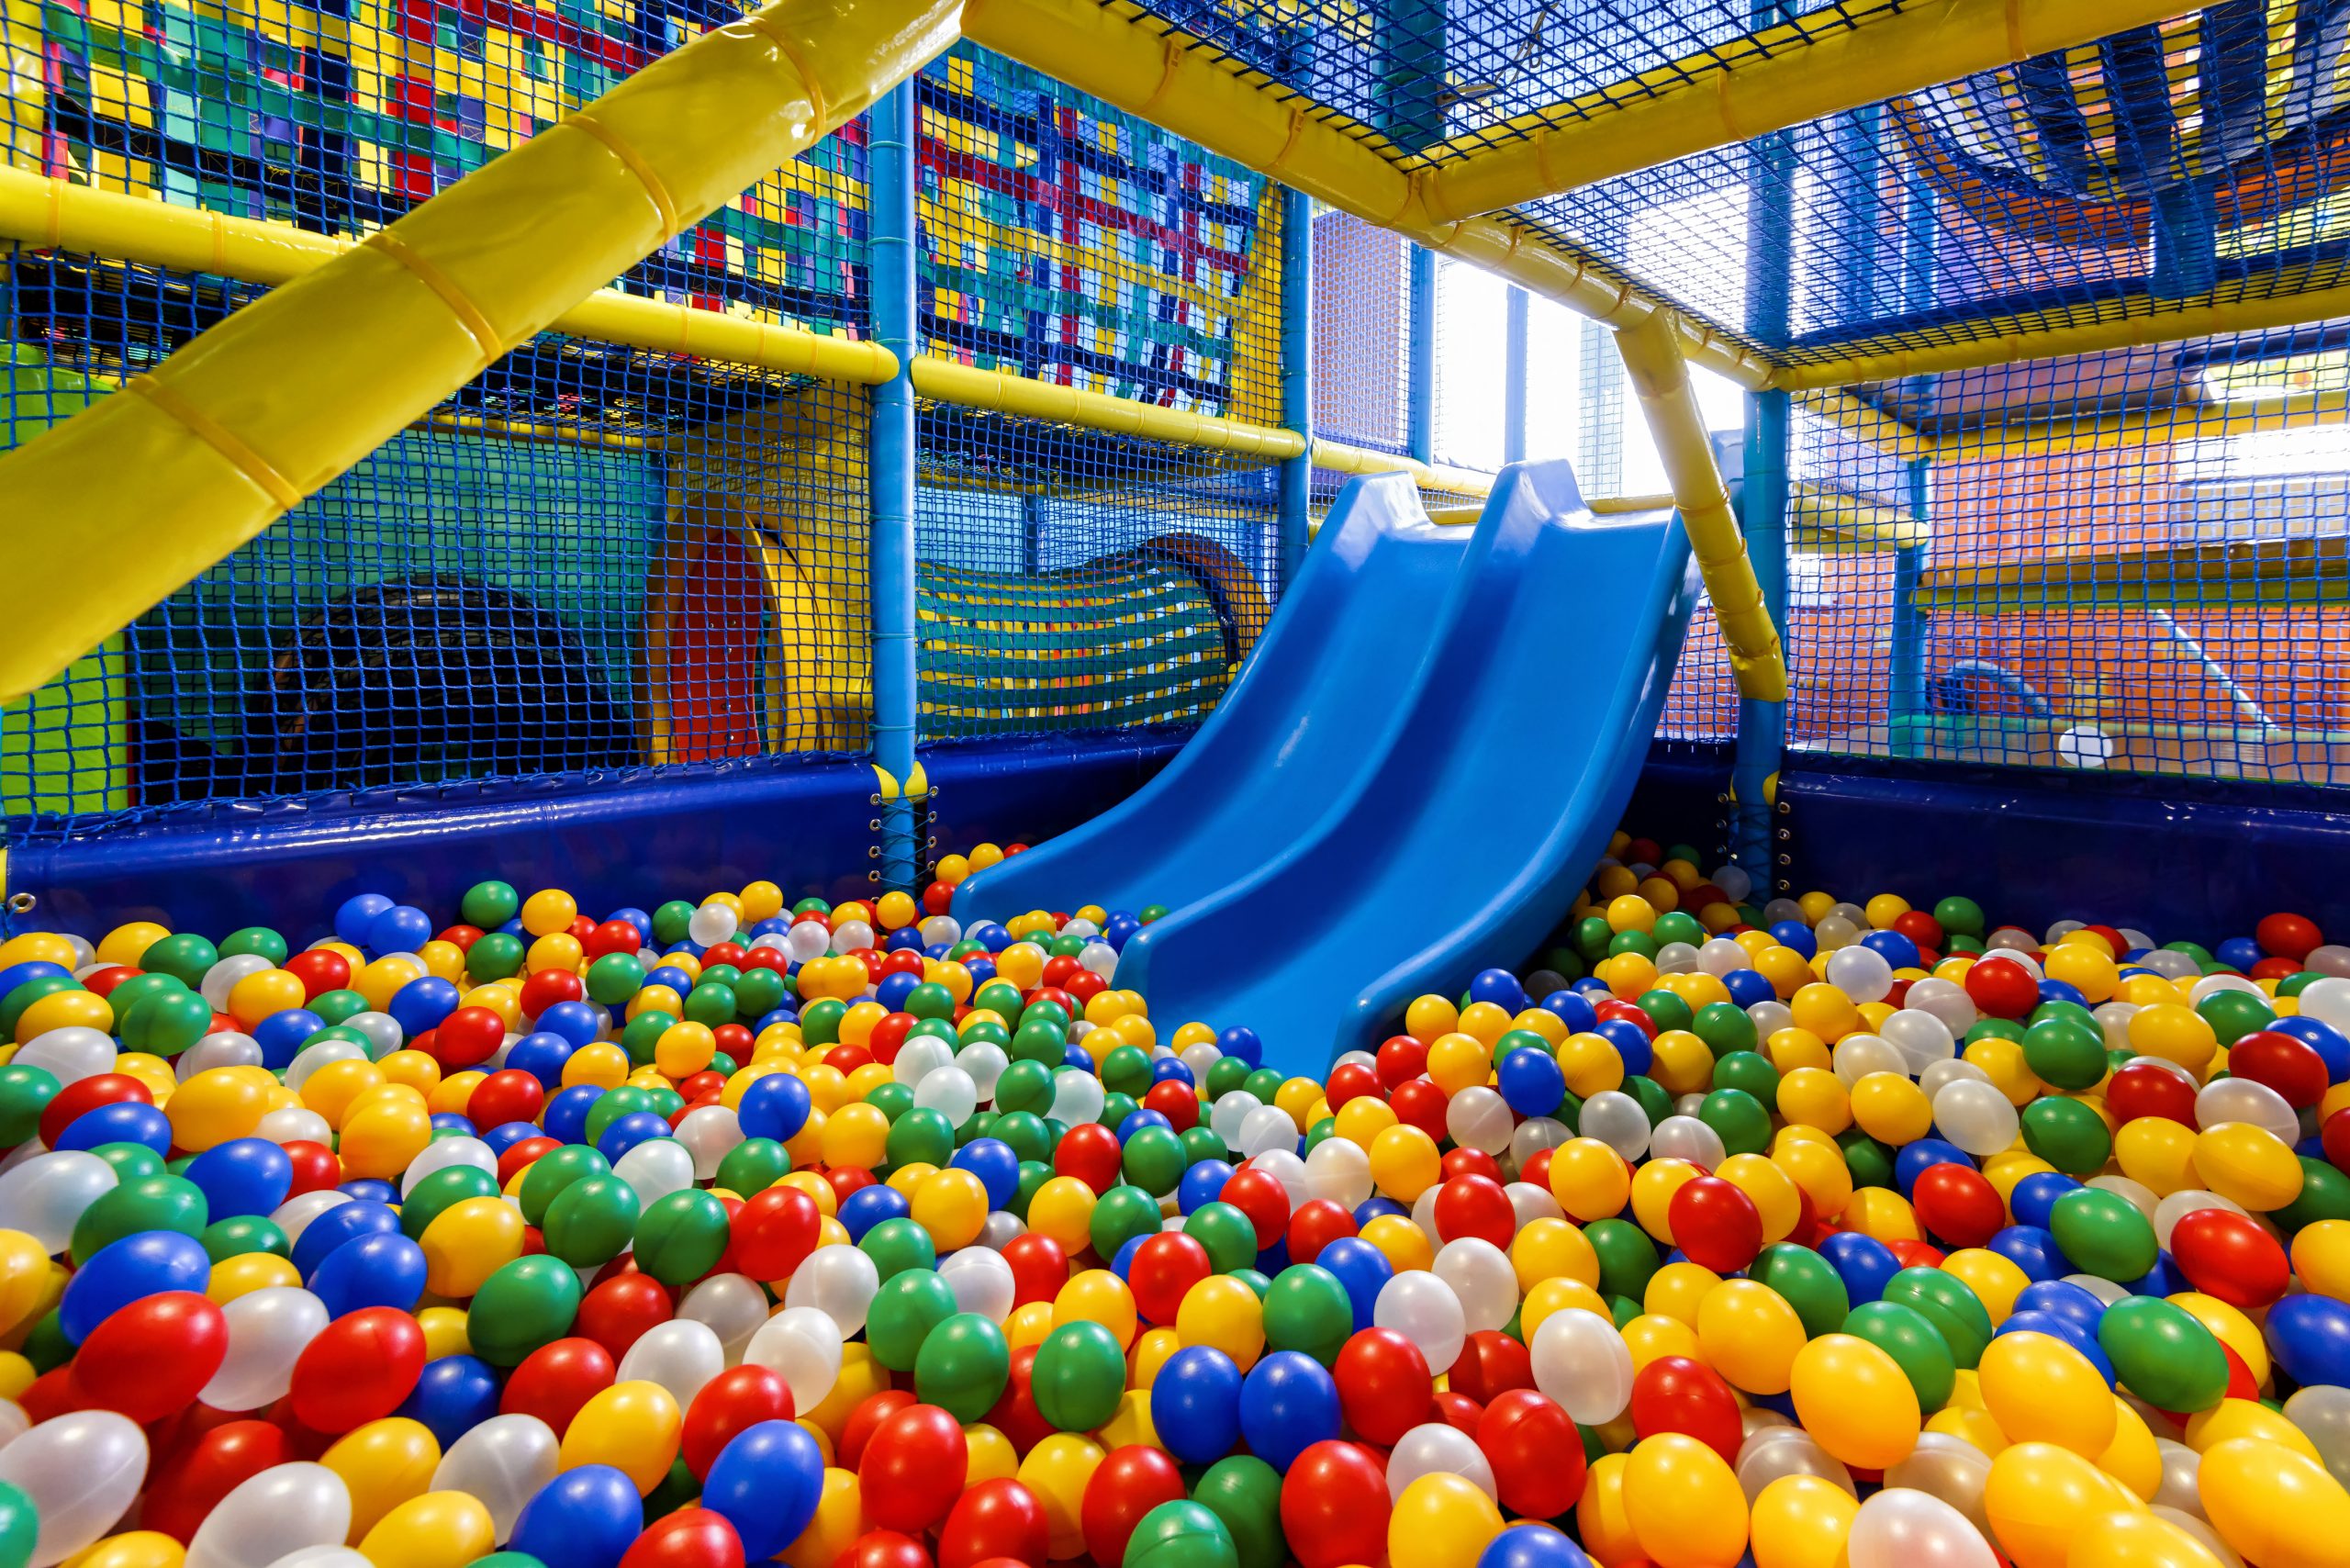 Indoor Ball Pit And Slide Scaled 